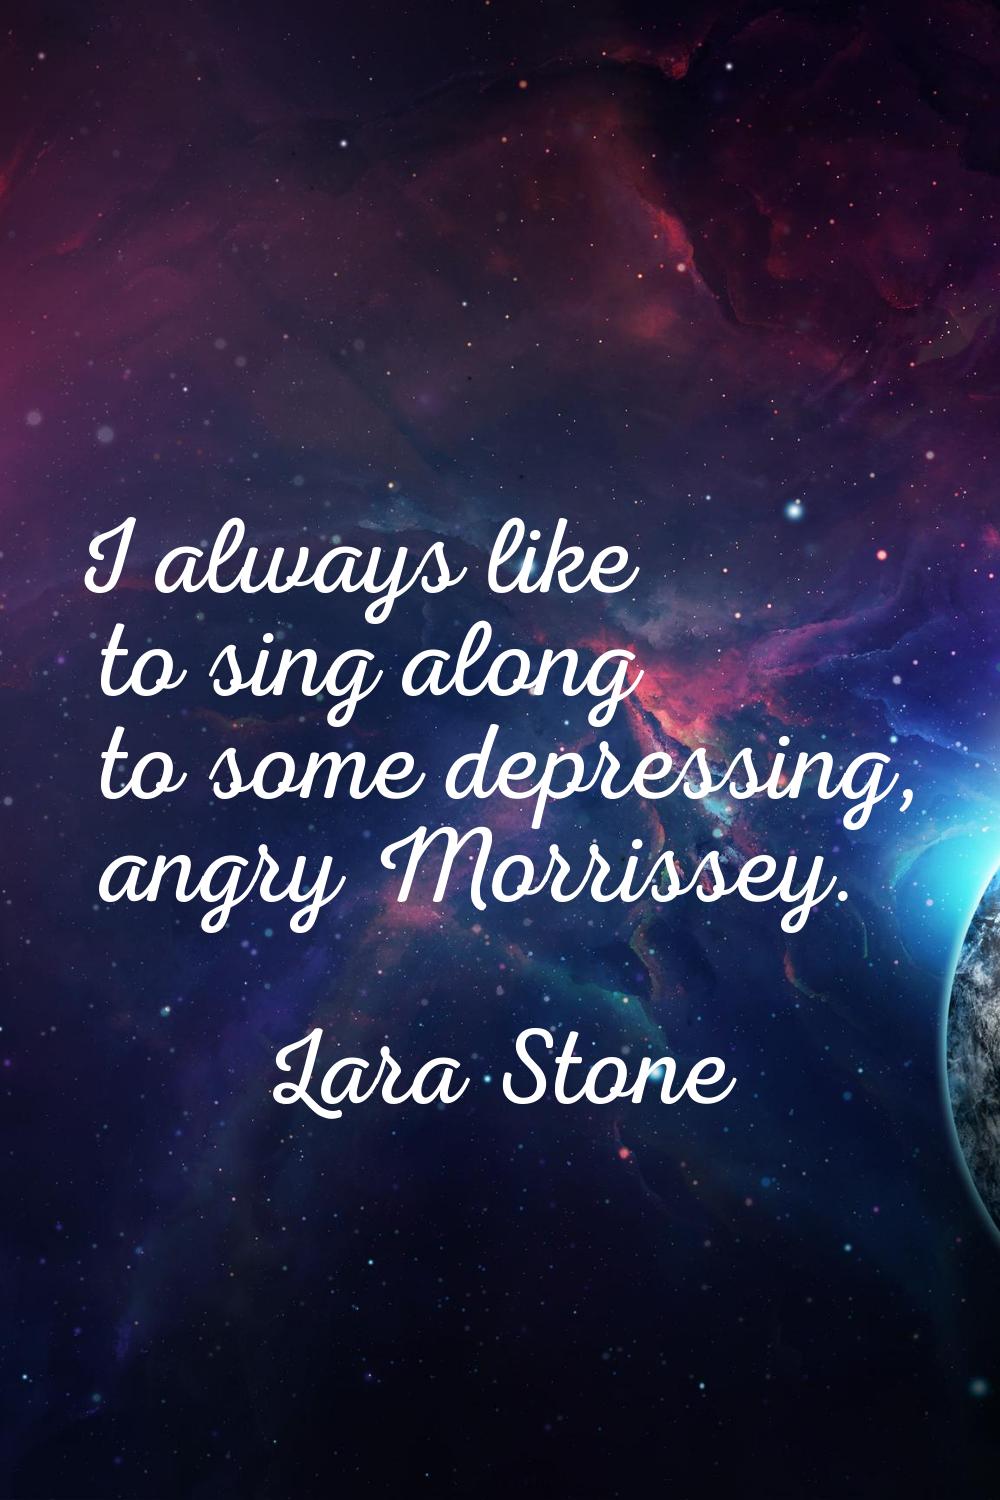 I always like to sing along to some depressing, angry Morrissey.